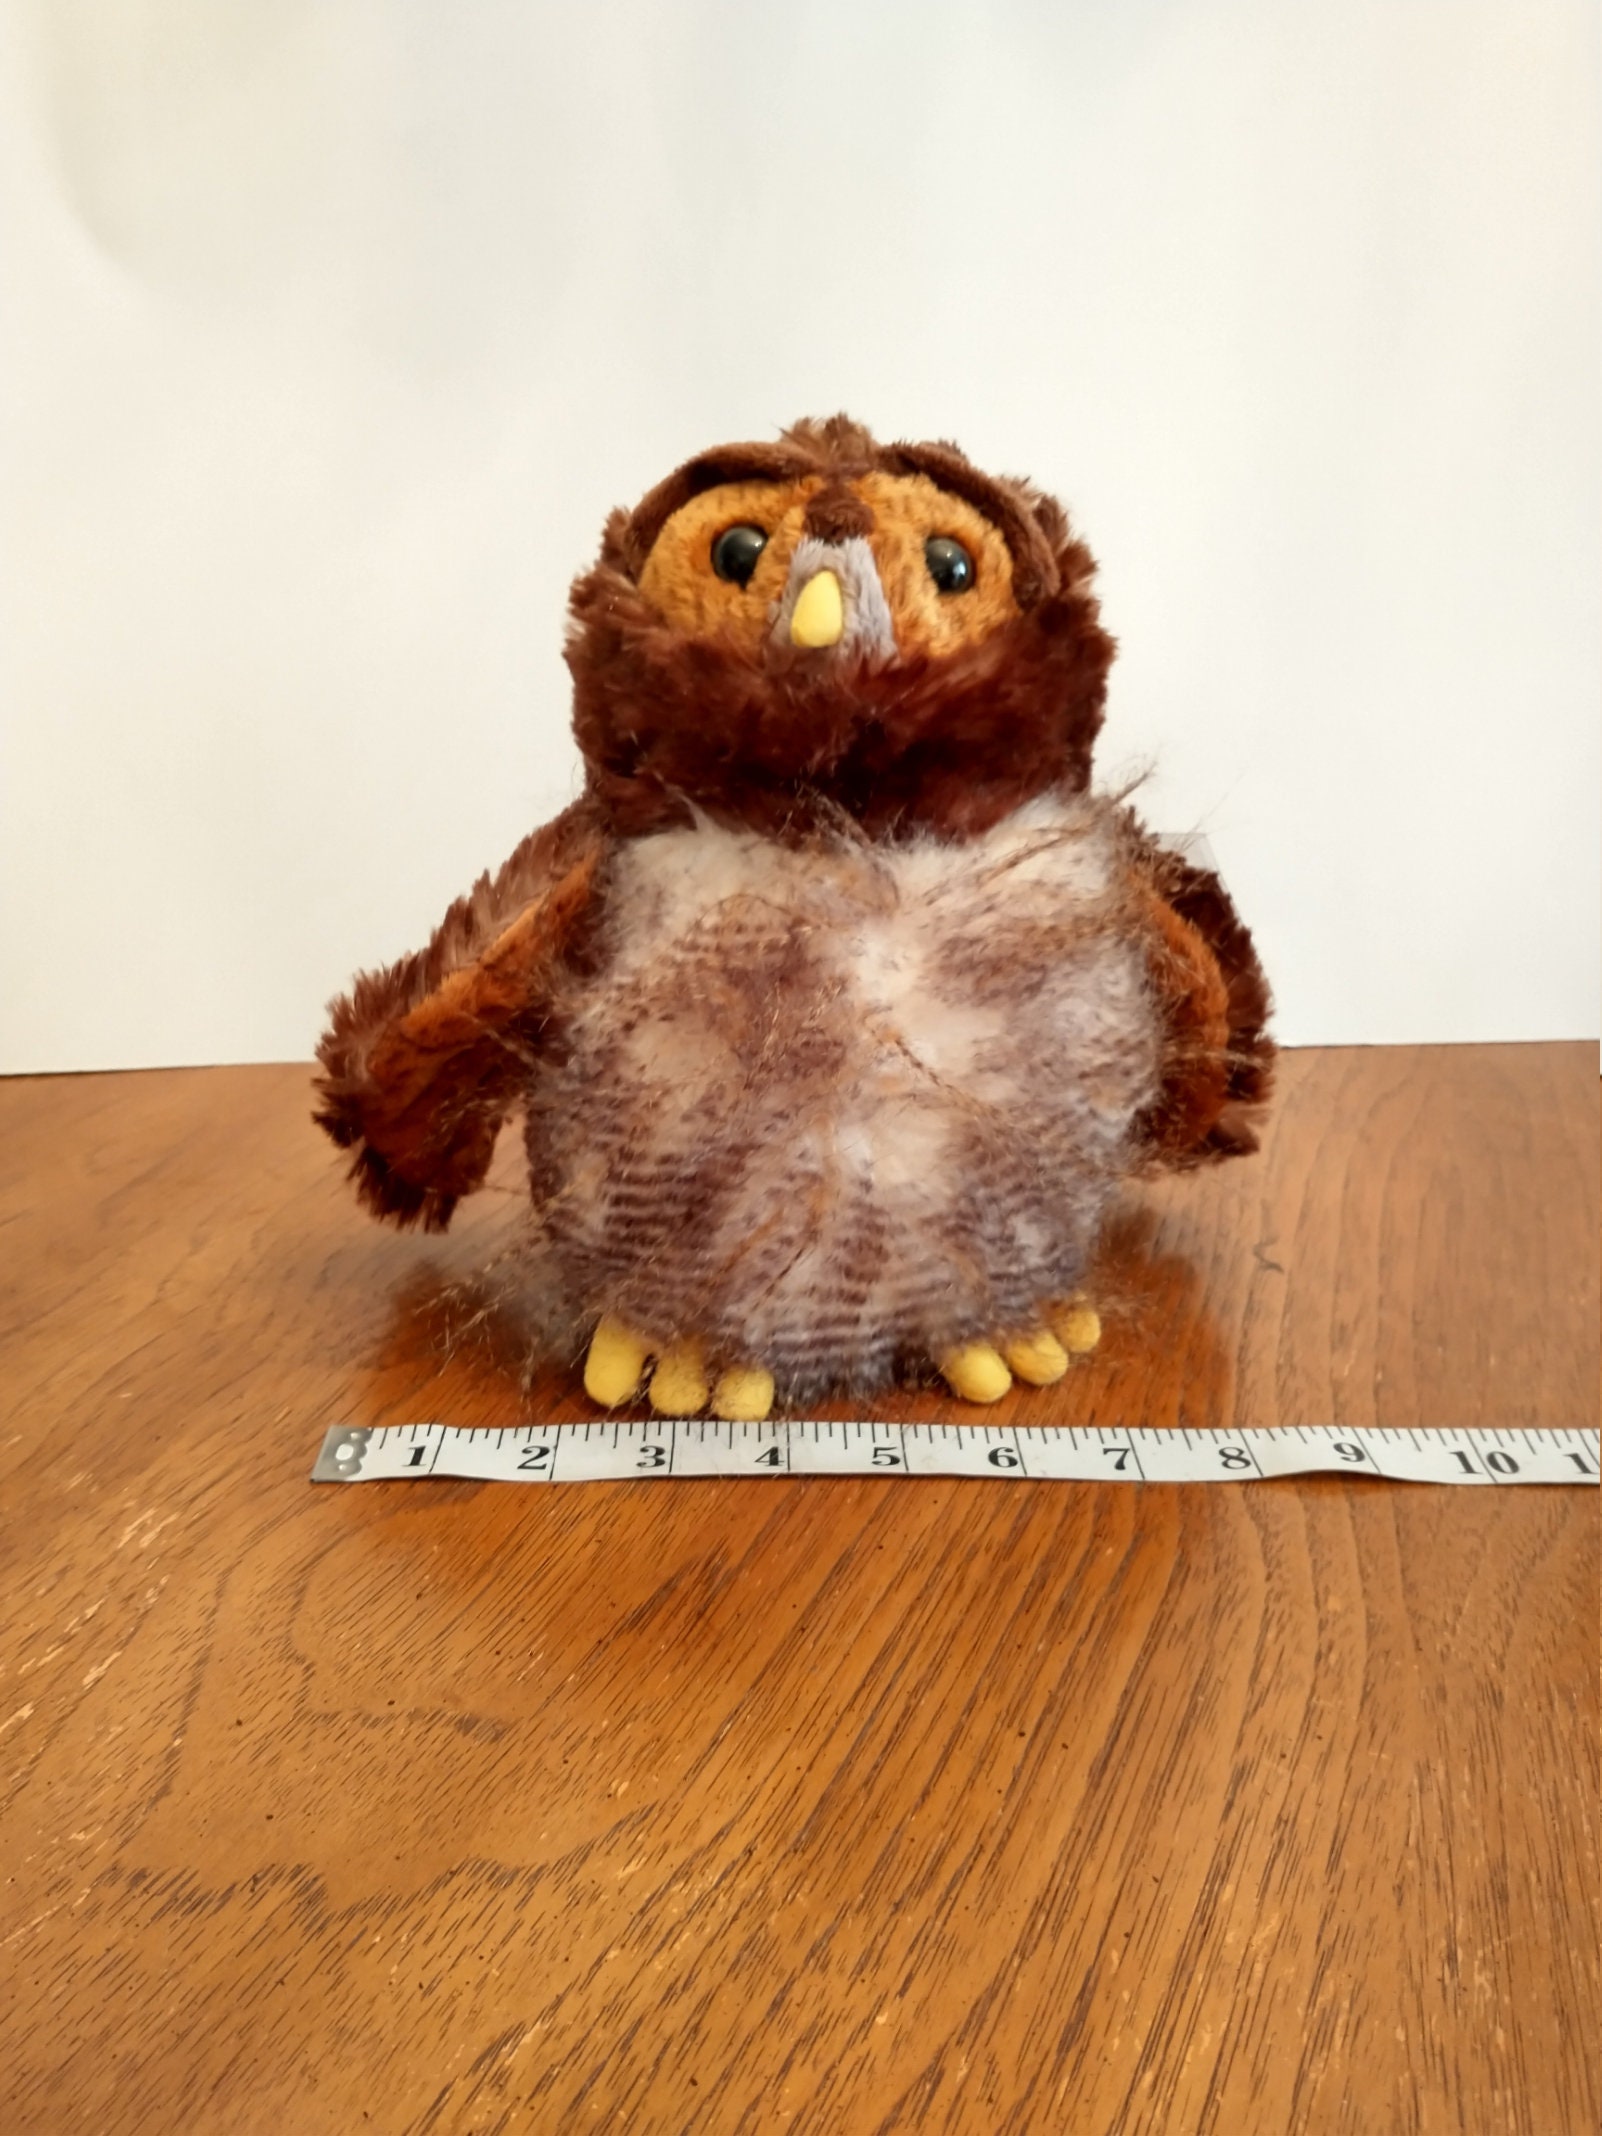 Webkinz Barred Owl HM451 NEW With Sealed Code 